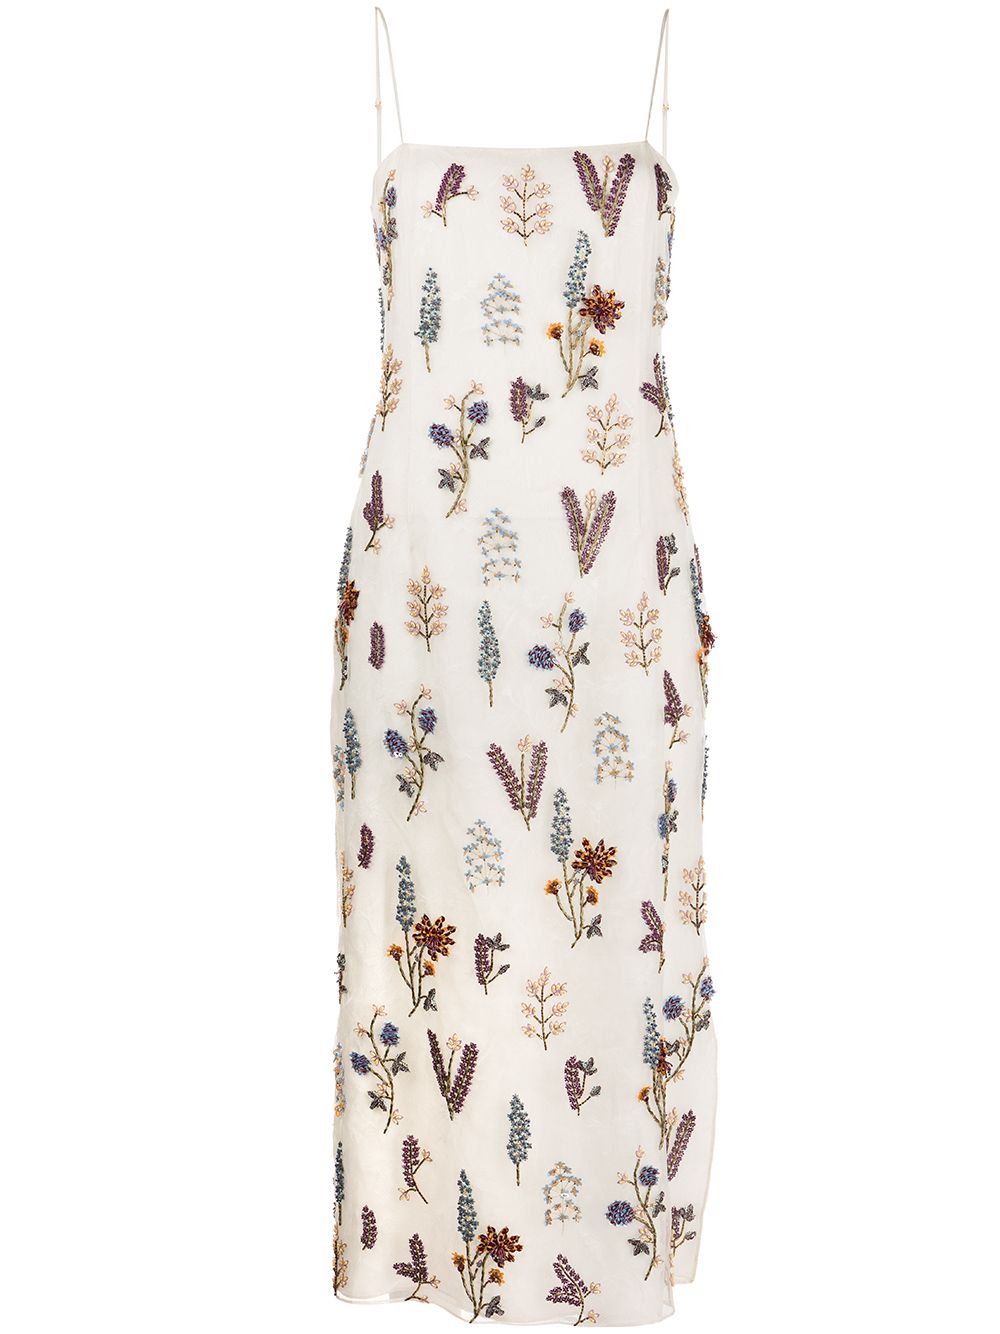 ADAM LIPPES FLORAL-EMBROIDERED SLIP DRESS